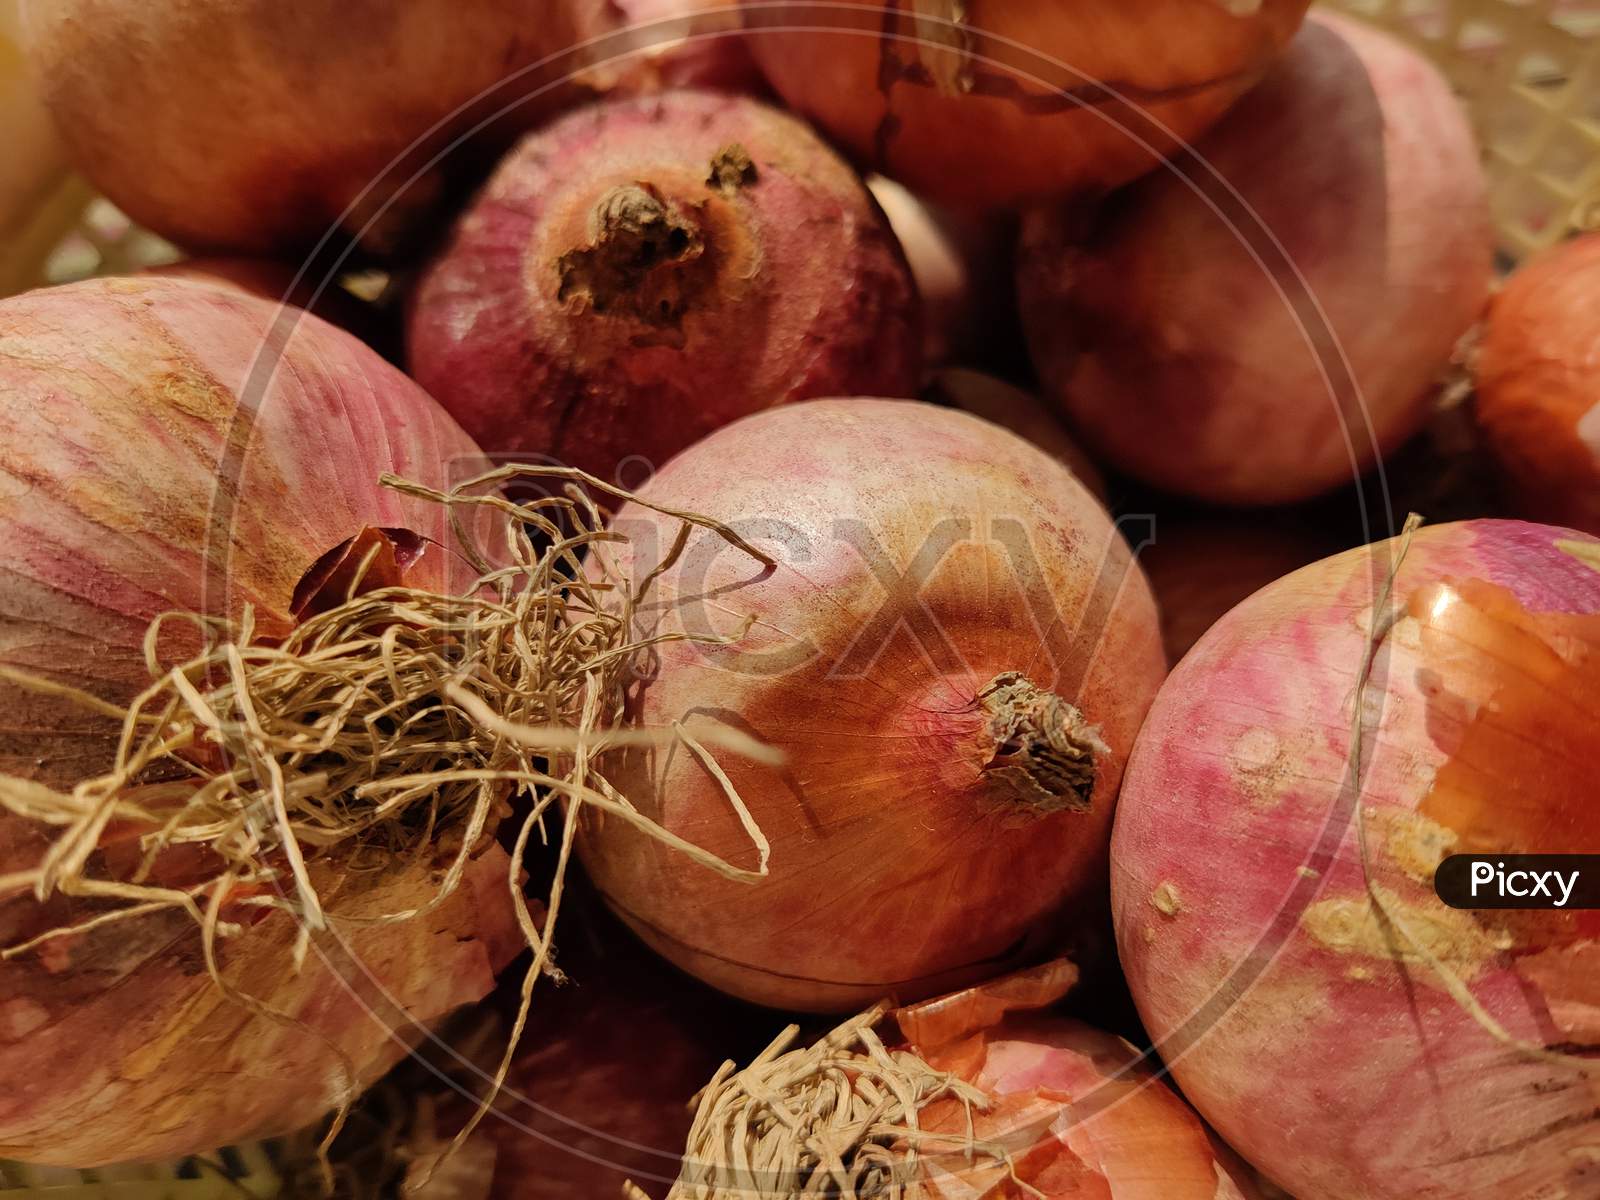 Onion in the basket